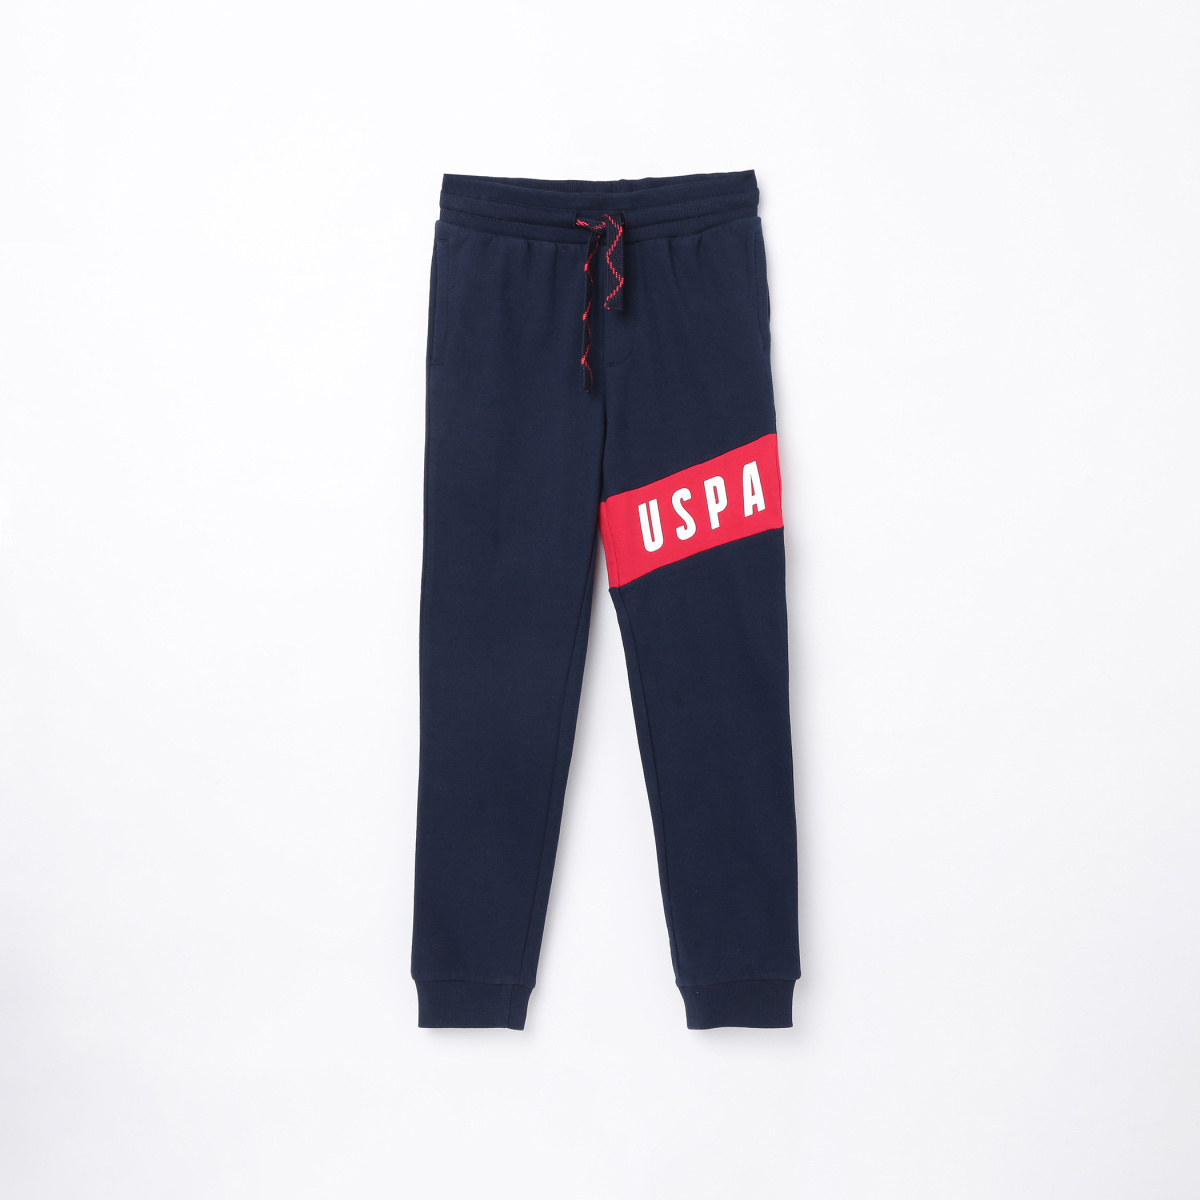 US Polo Men's Comfort Fit Heathered Track Pants